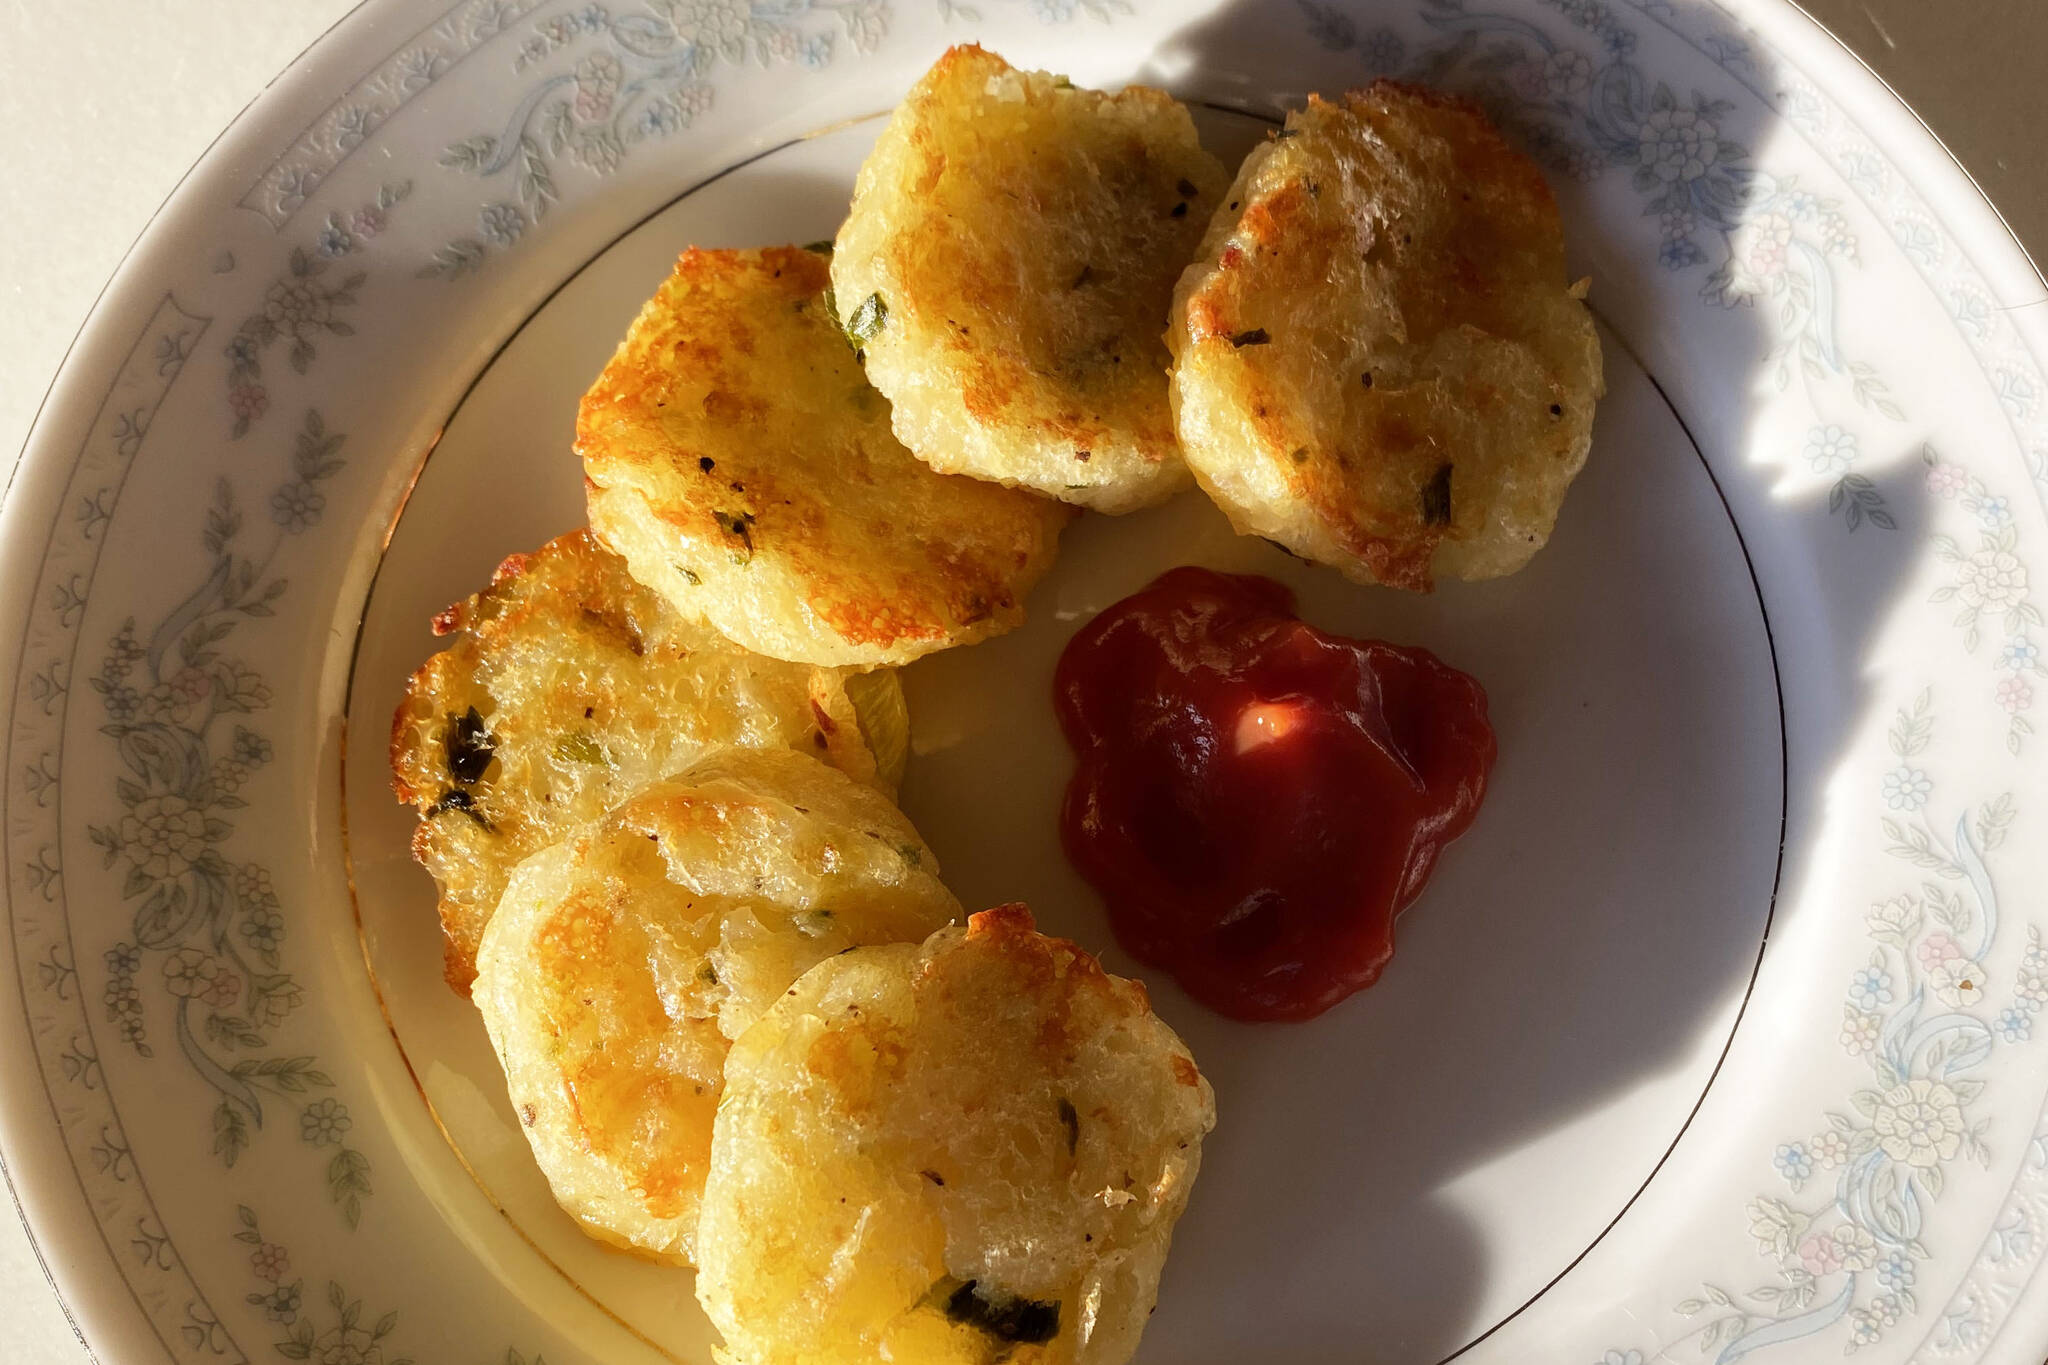 Appease your child’s picky palate with these tasty Tater Tots. (Photo by Tressa Dale/Peninsula Clarion)